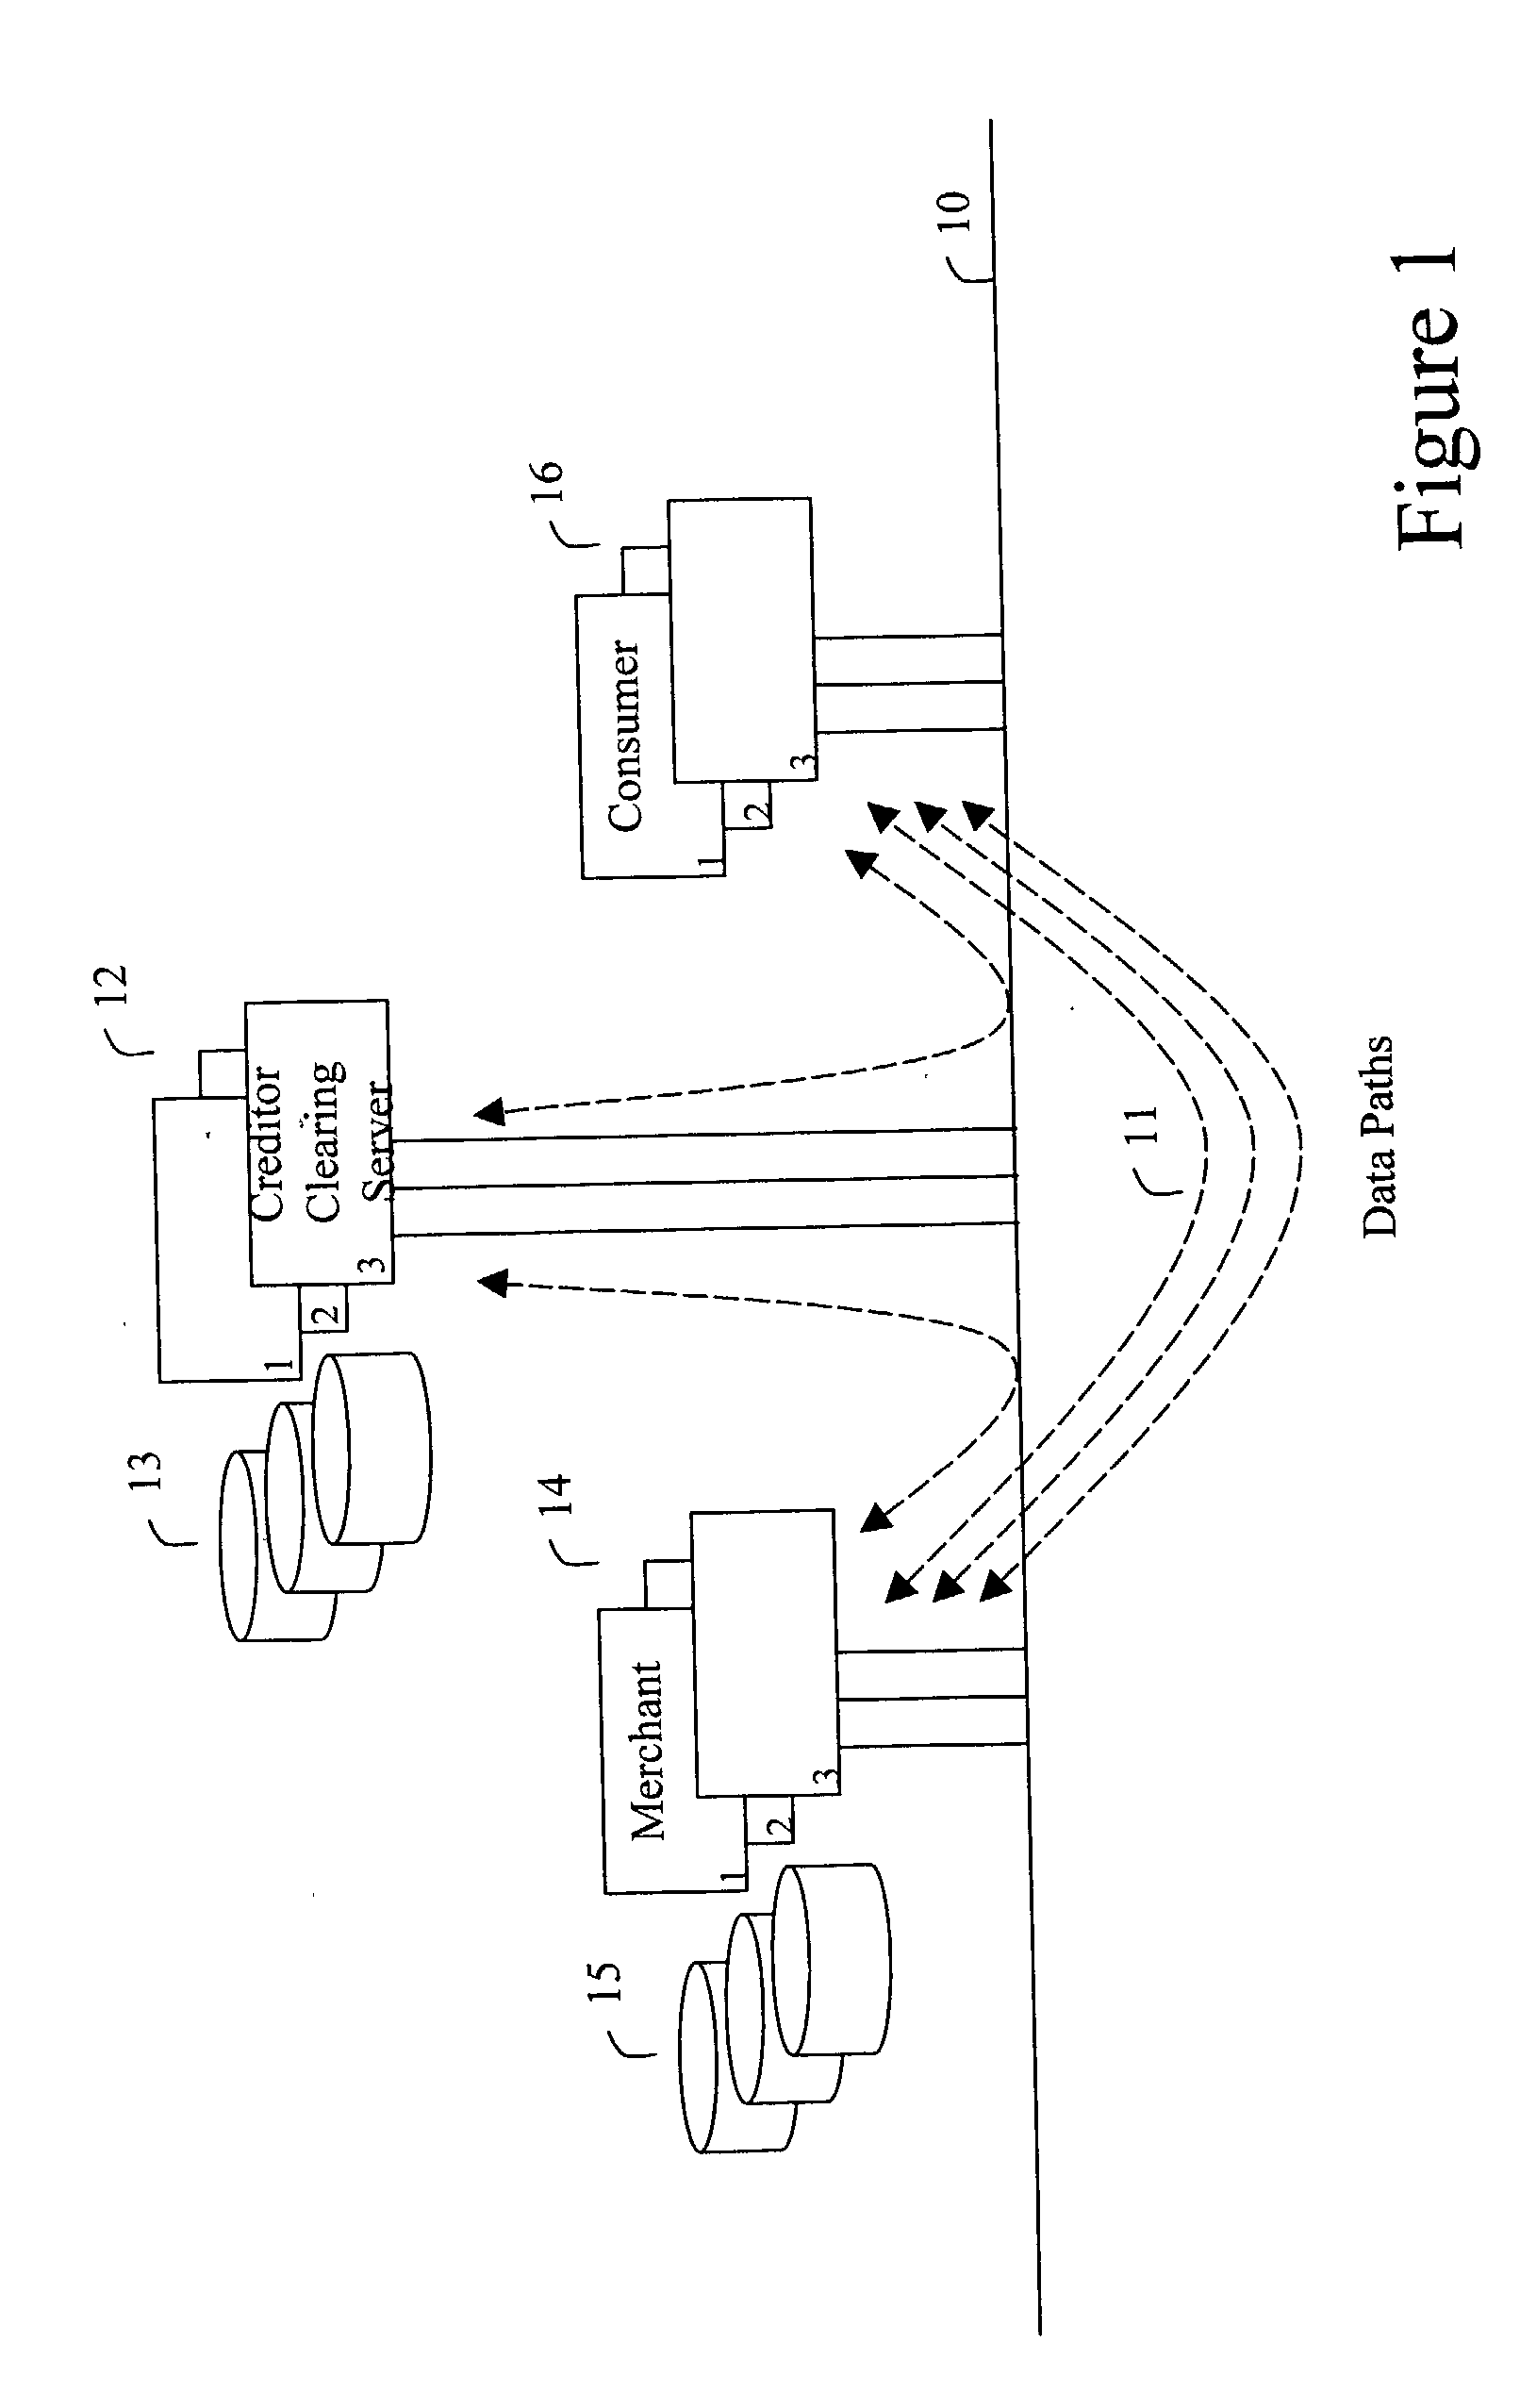 Method and apparatus for making secure electronic payments